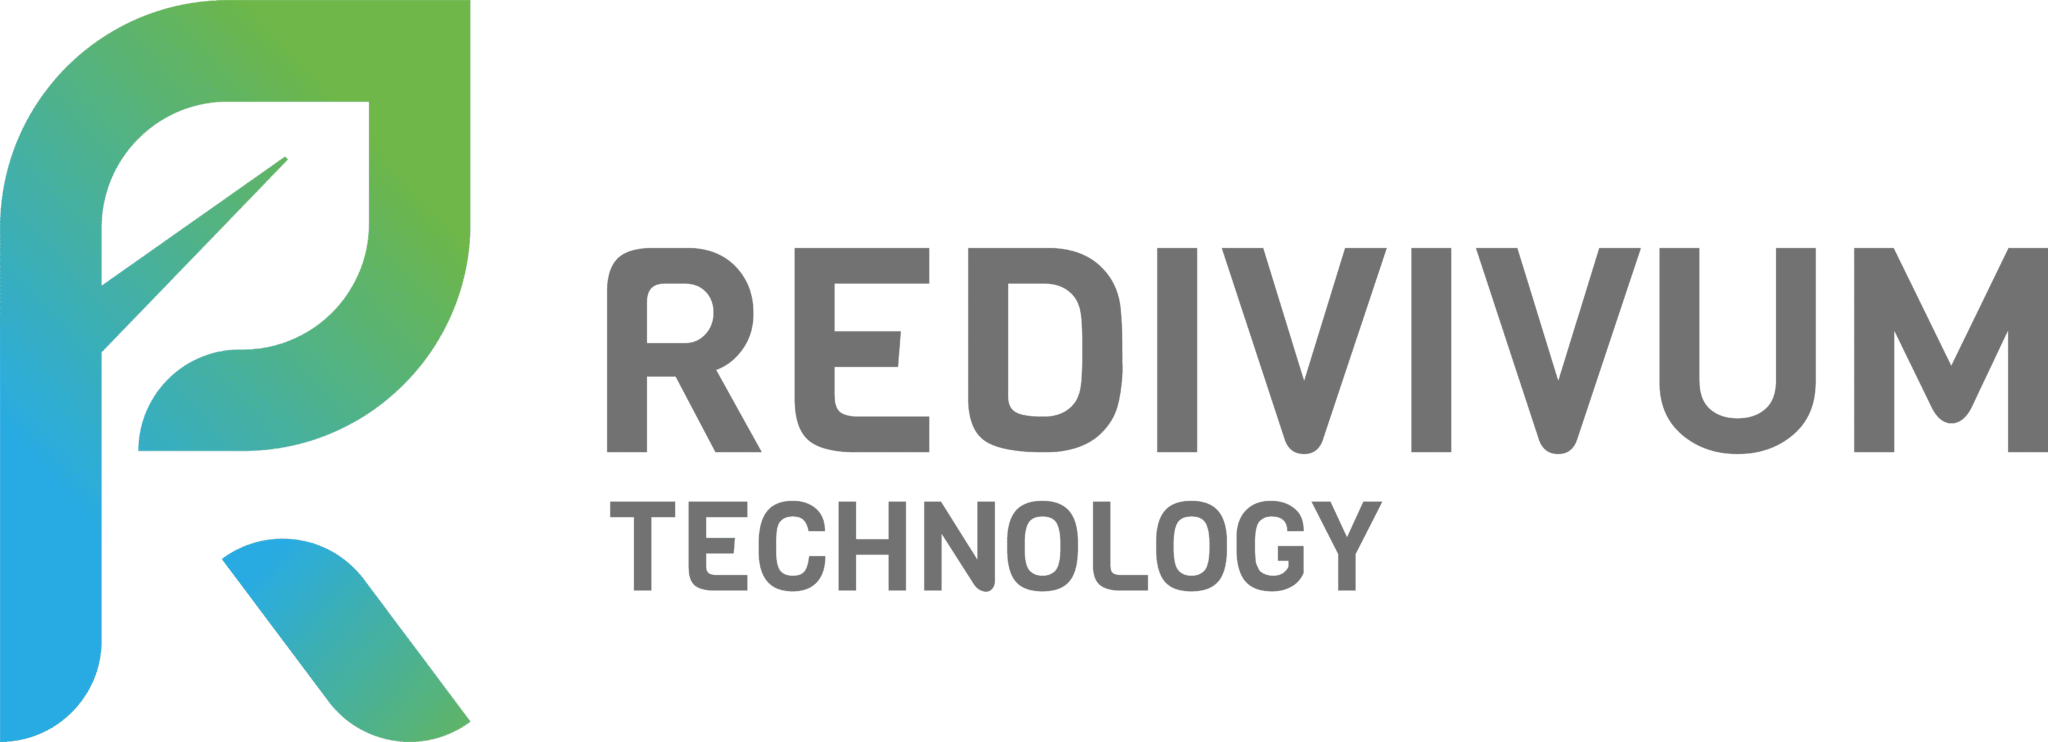 This is the logo of Redivivum, one of the startups out of our Hardtech Innovation accelerator program.